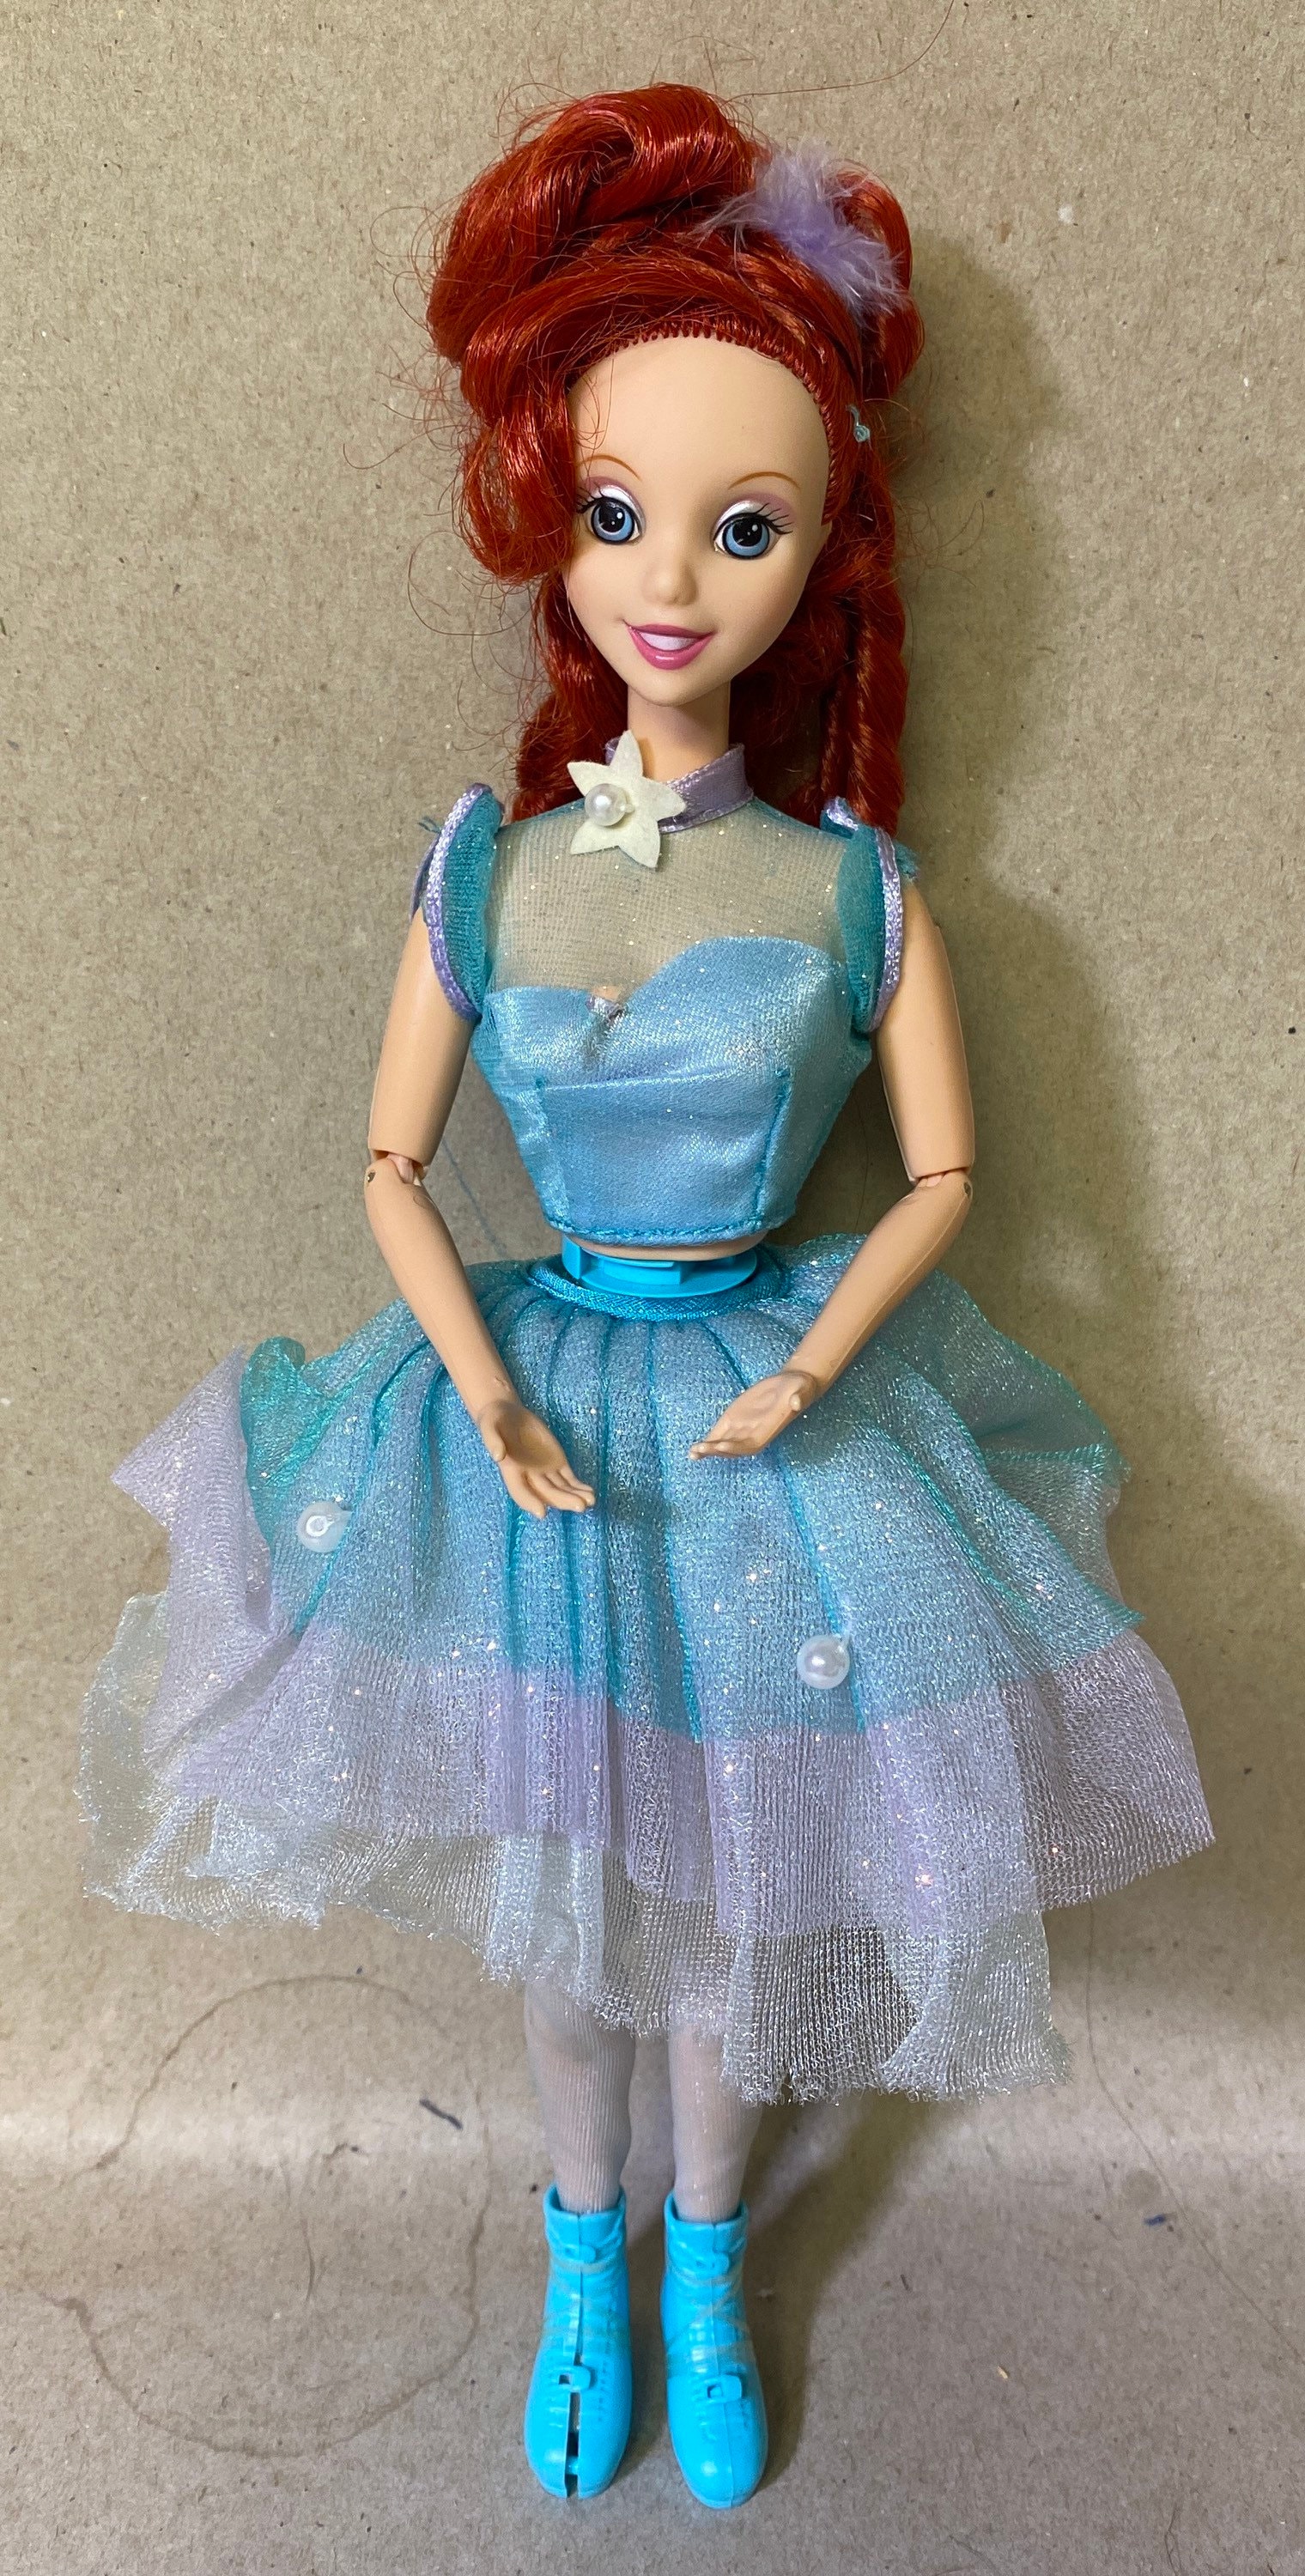 Disney Is Selling $110 Princess Dolls This Holiday — See the Photos